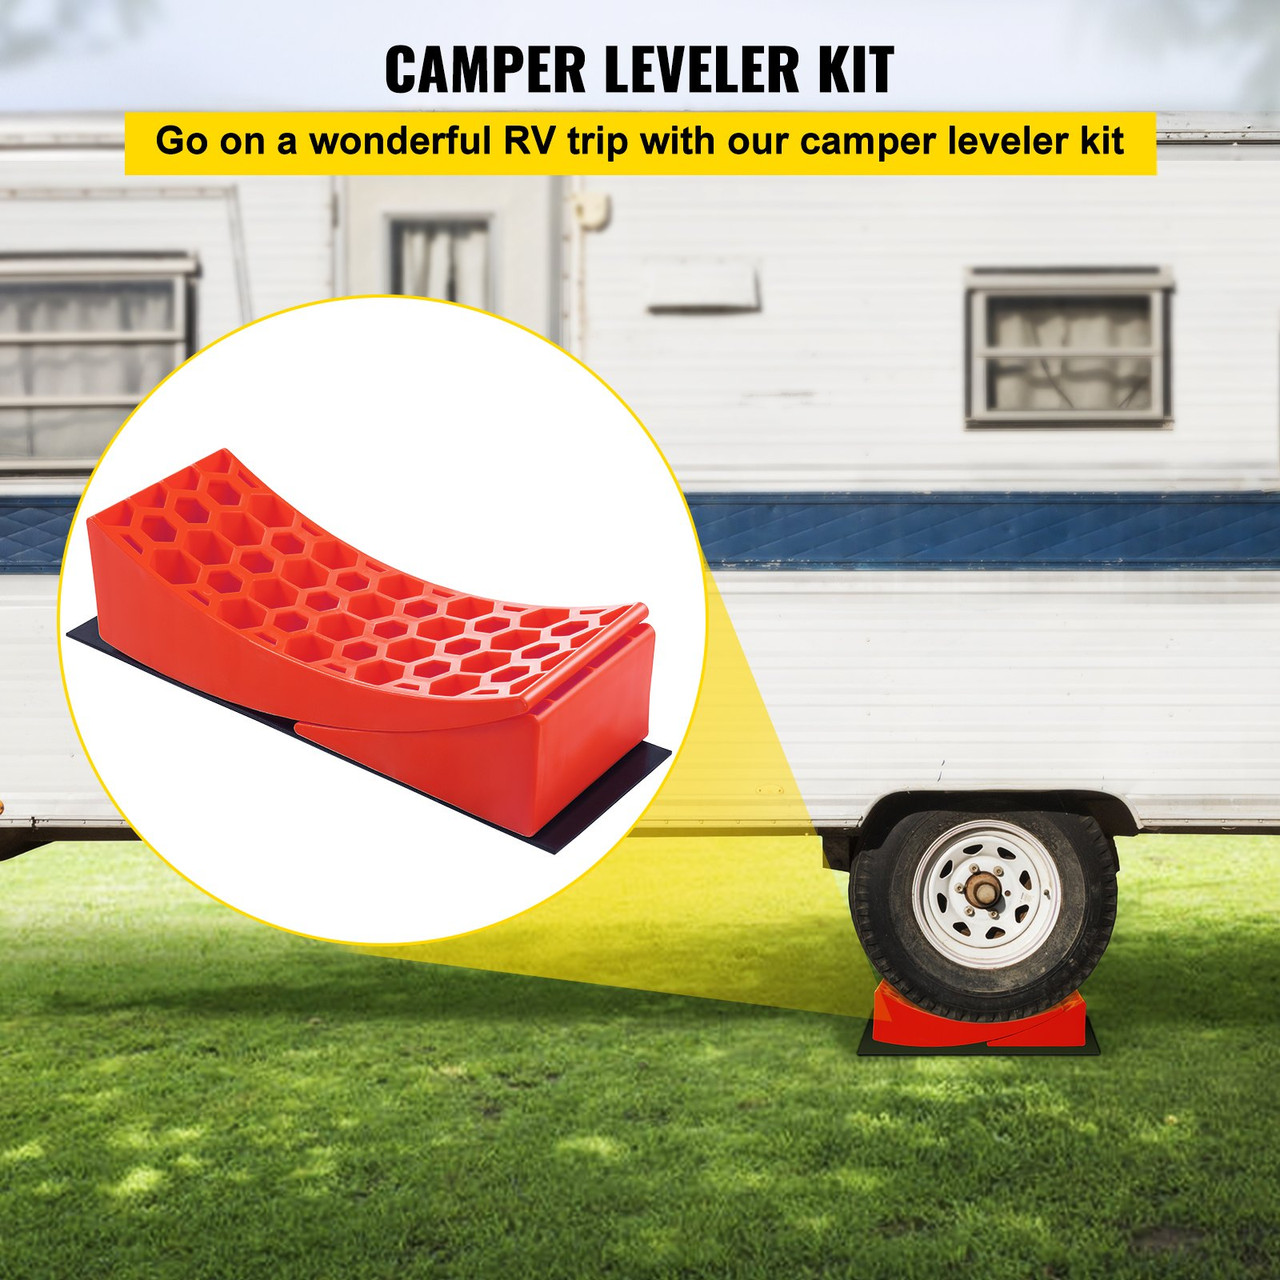 Camper Leveler, 14 Pack, HDPE RV Leveling Blocks, Includes Two Curved Levelers, Four Chocks, Four Pads, Two Anti-Slip Mats, One Step & Carry Bag, Heavy Duty Leveler for Camper Up to 35,000 Lbs